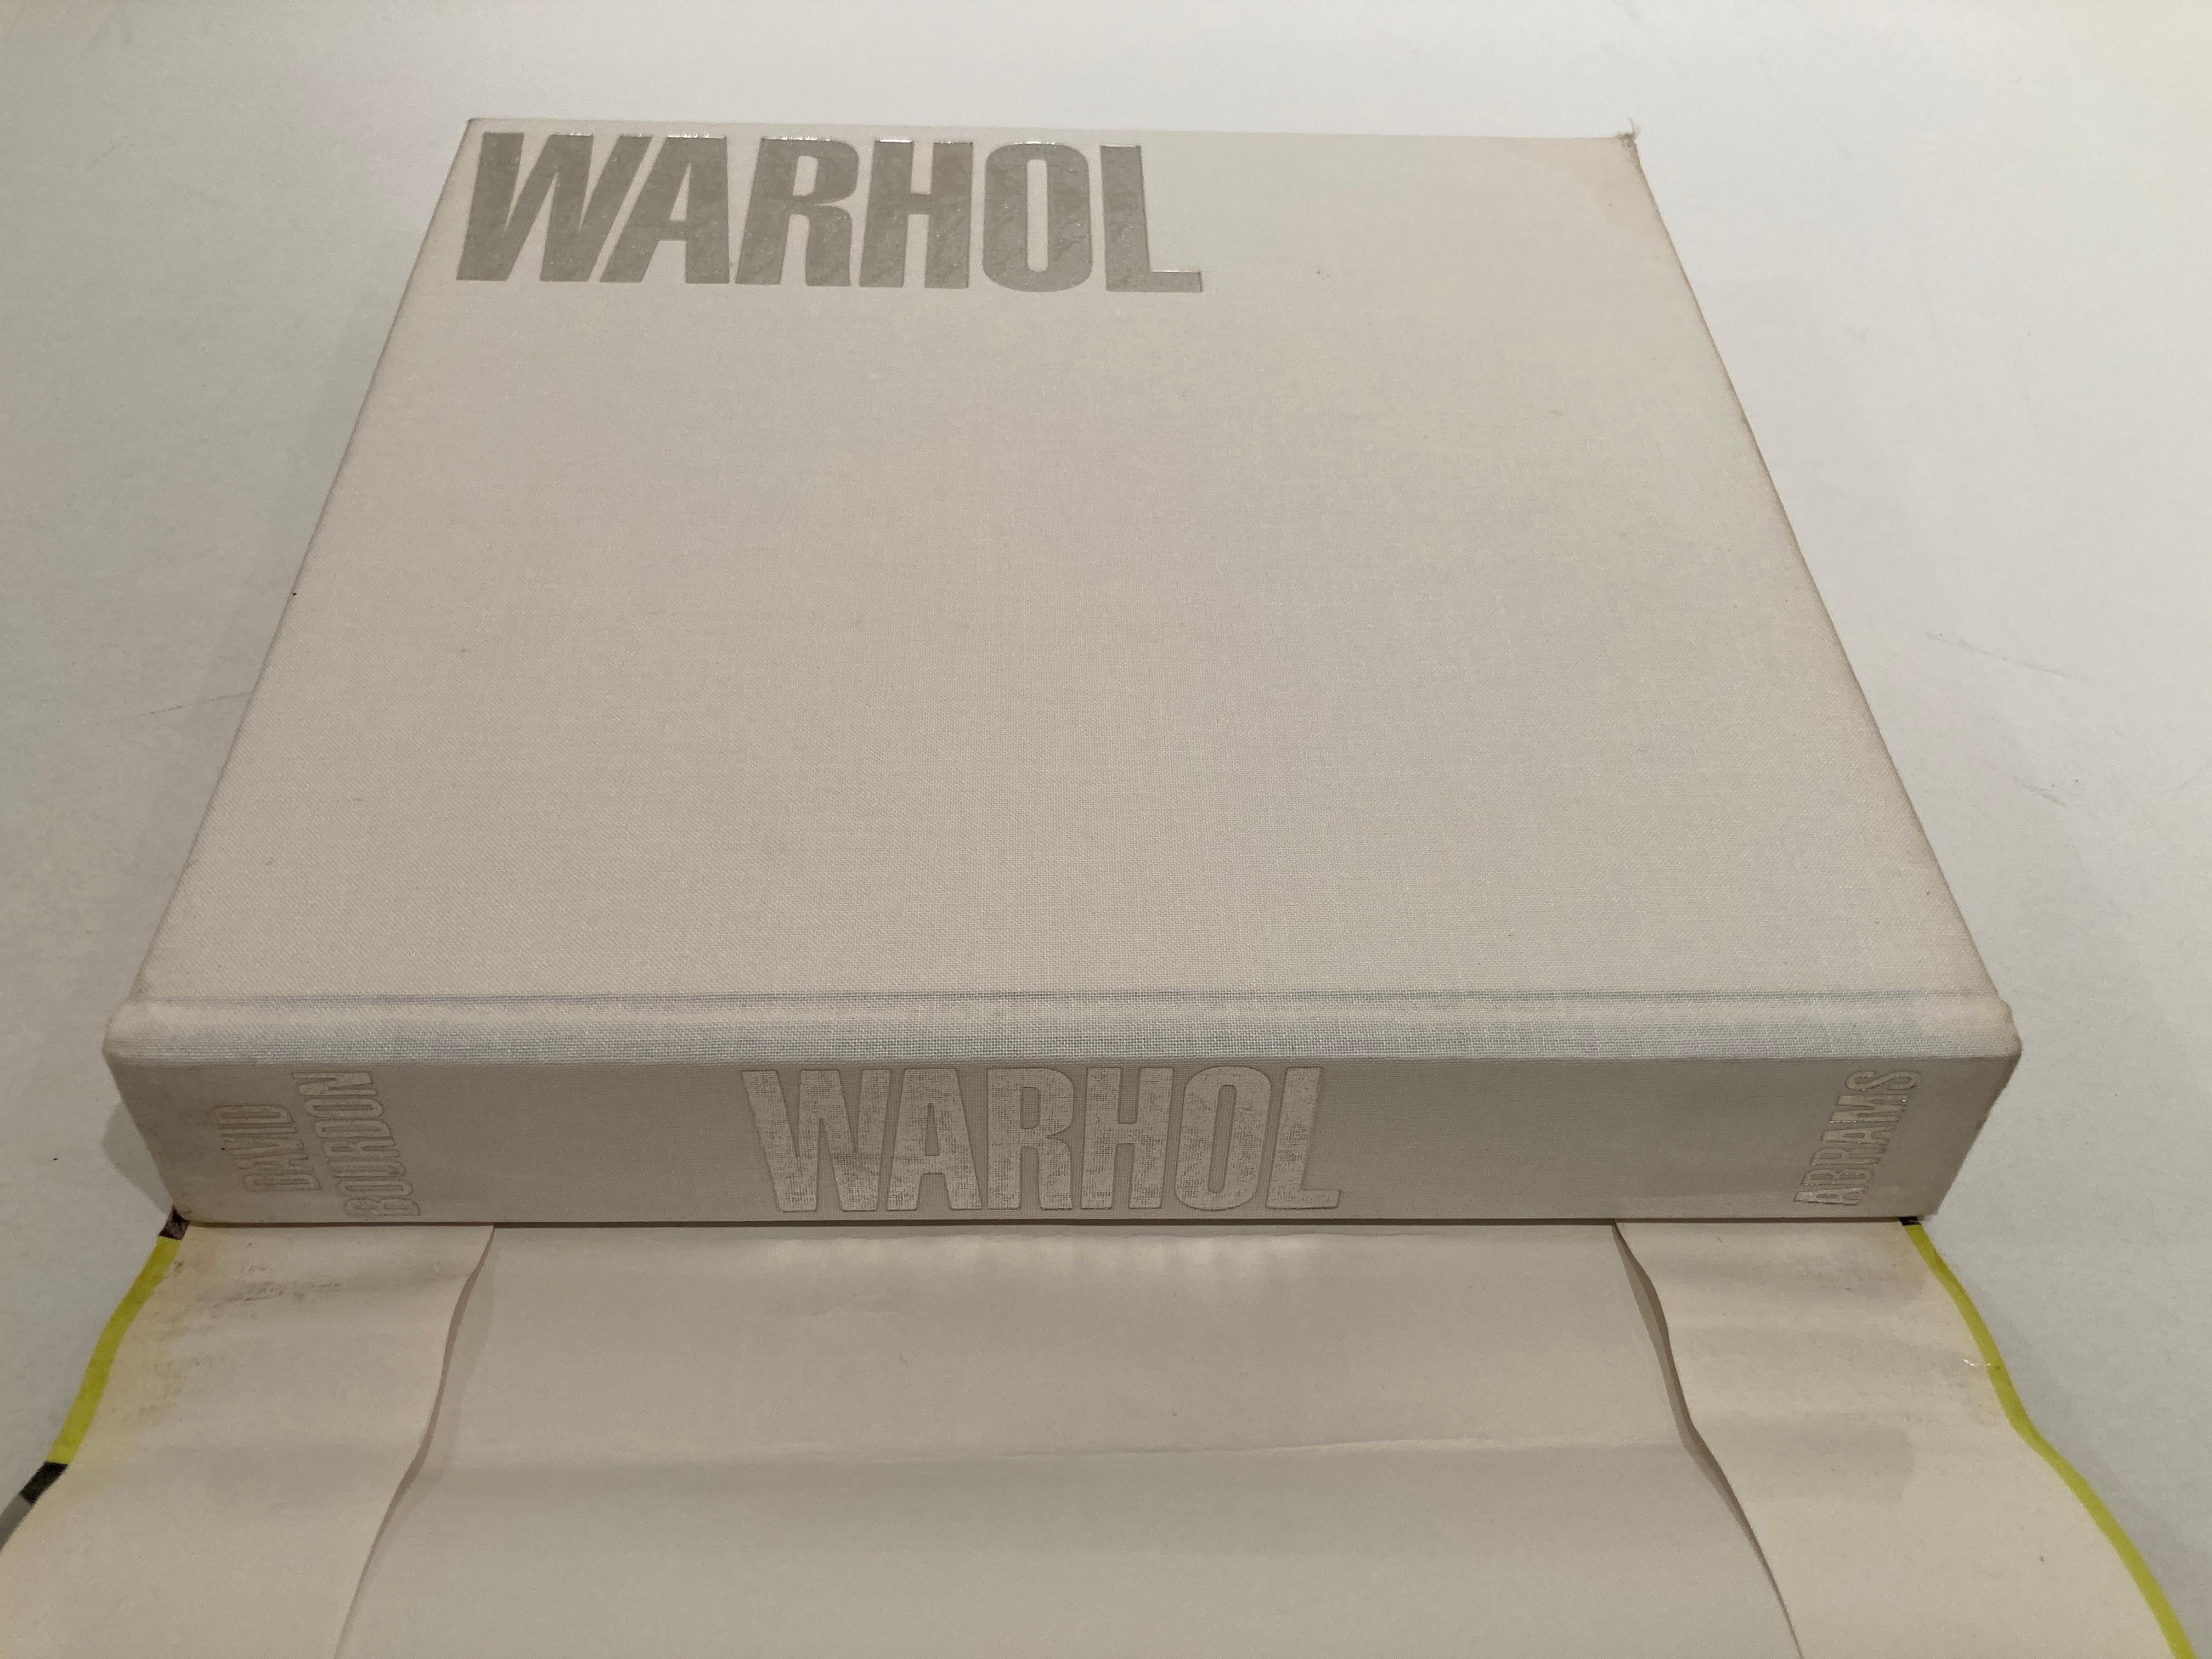 20th Century Andy Warhol by David Bourdon Collectible Poster Art Book Vintage, 1989 For Sale